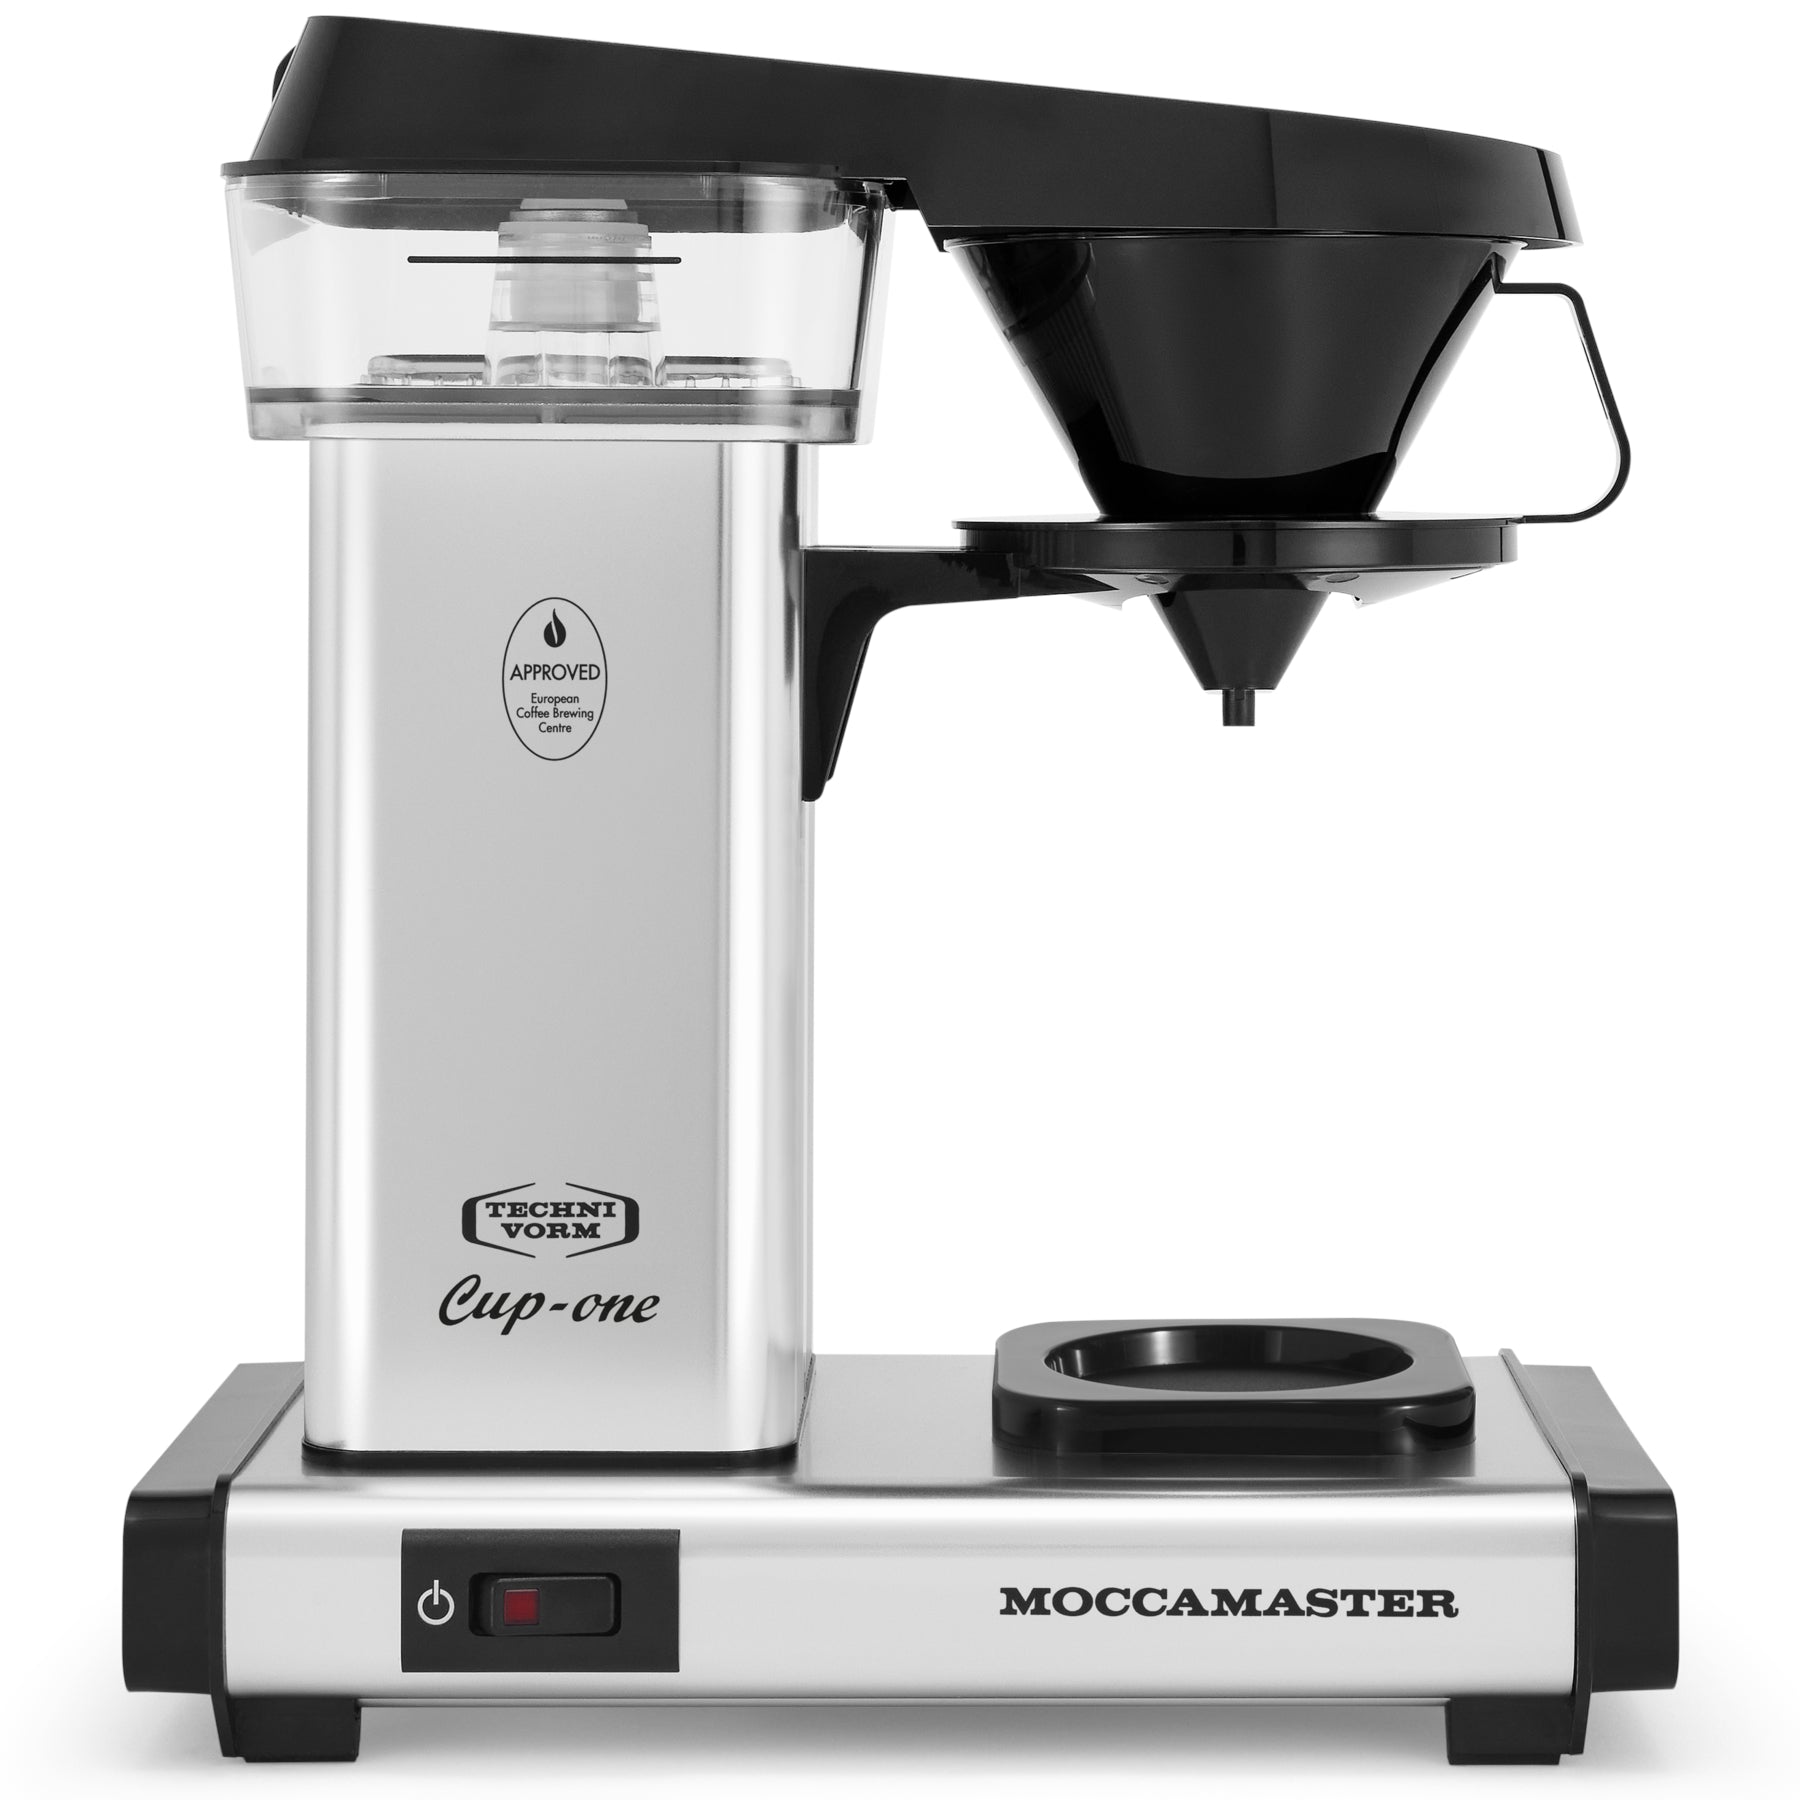 Dual Coffee Maker Brewer, Includes Two 14 Oz Travel Mugs